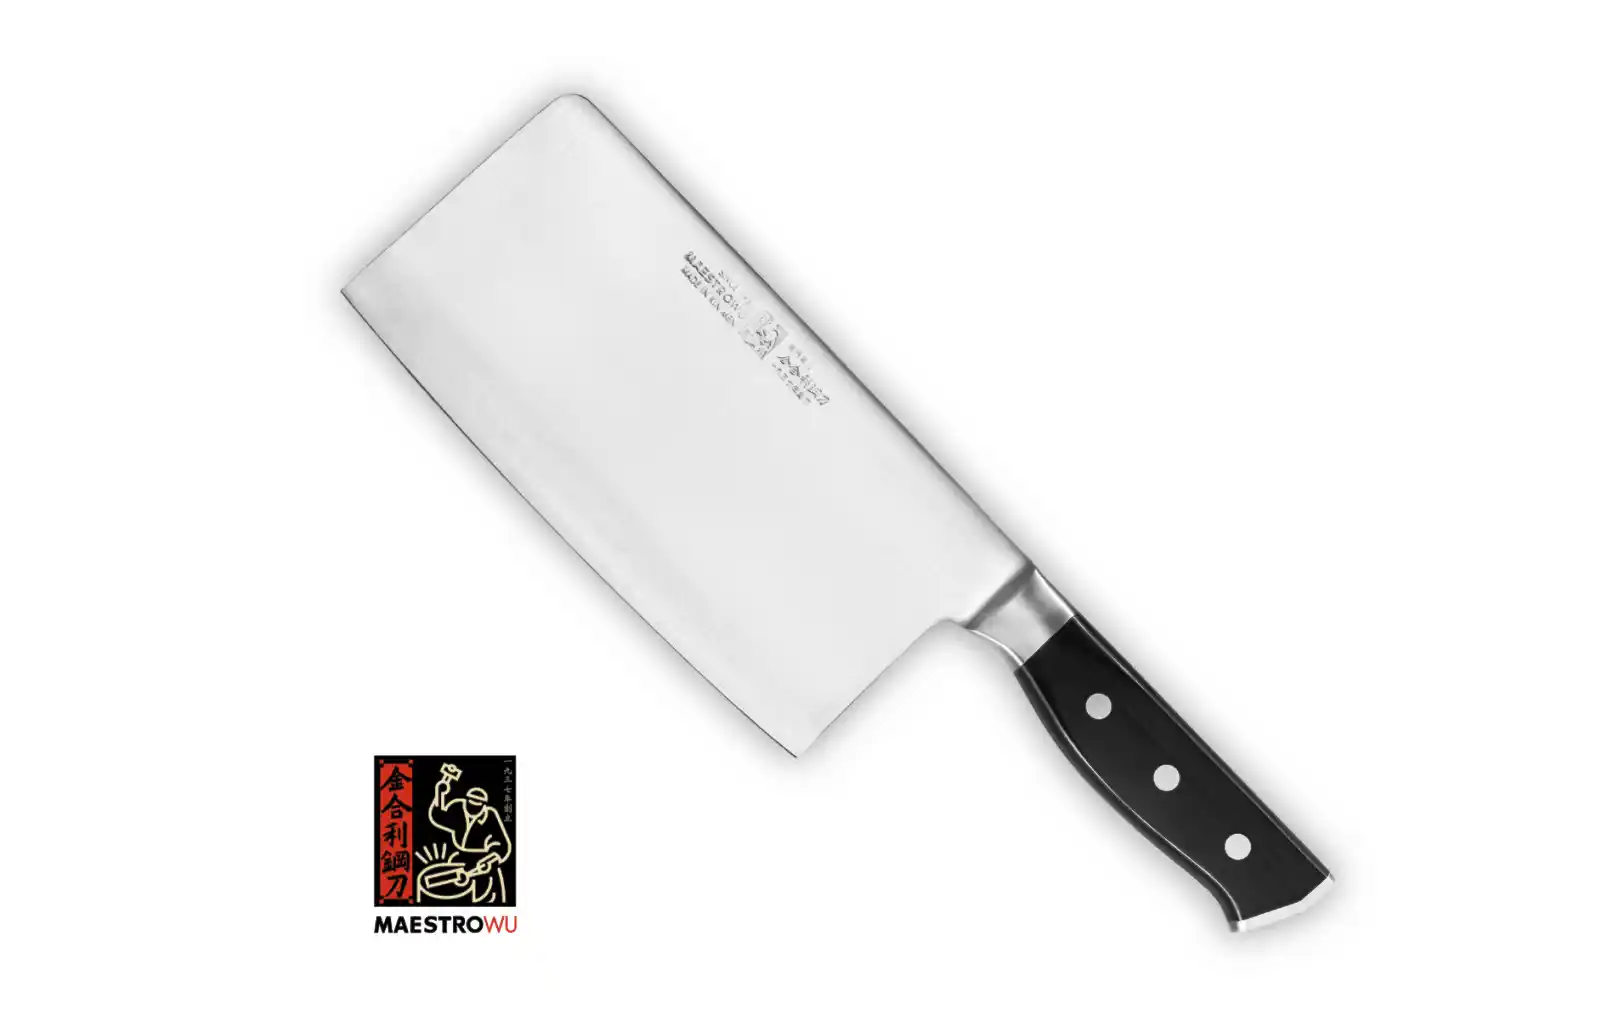 Maestro Wu D5 Chinese Meat Cleaver